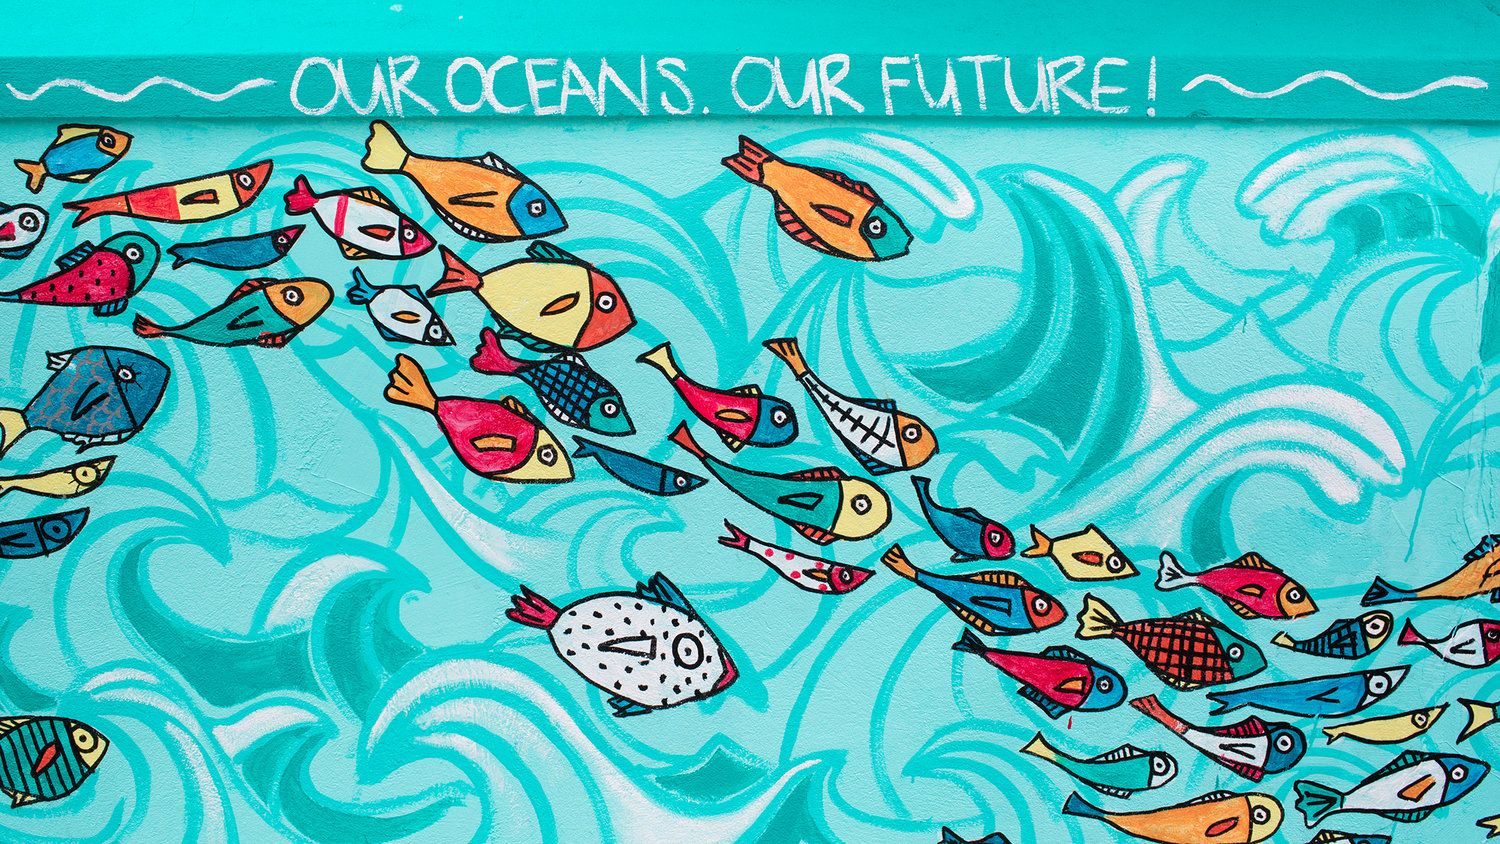 World Oceans Day: Celebrating the Sea We Share